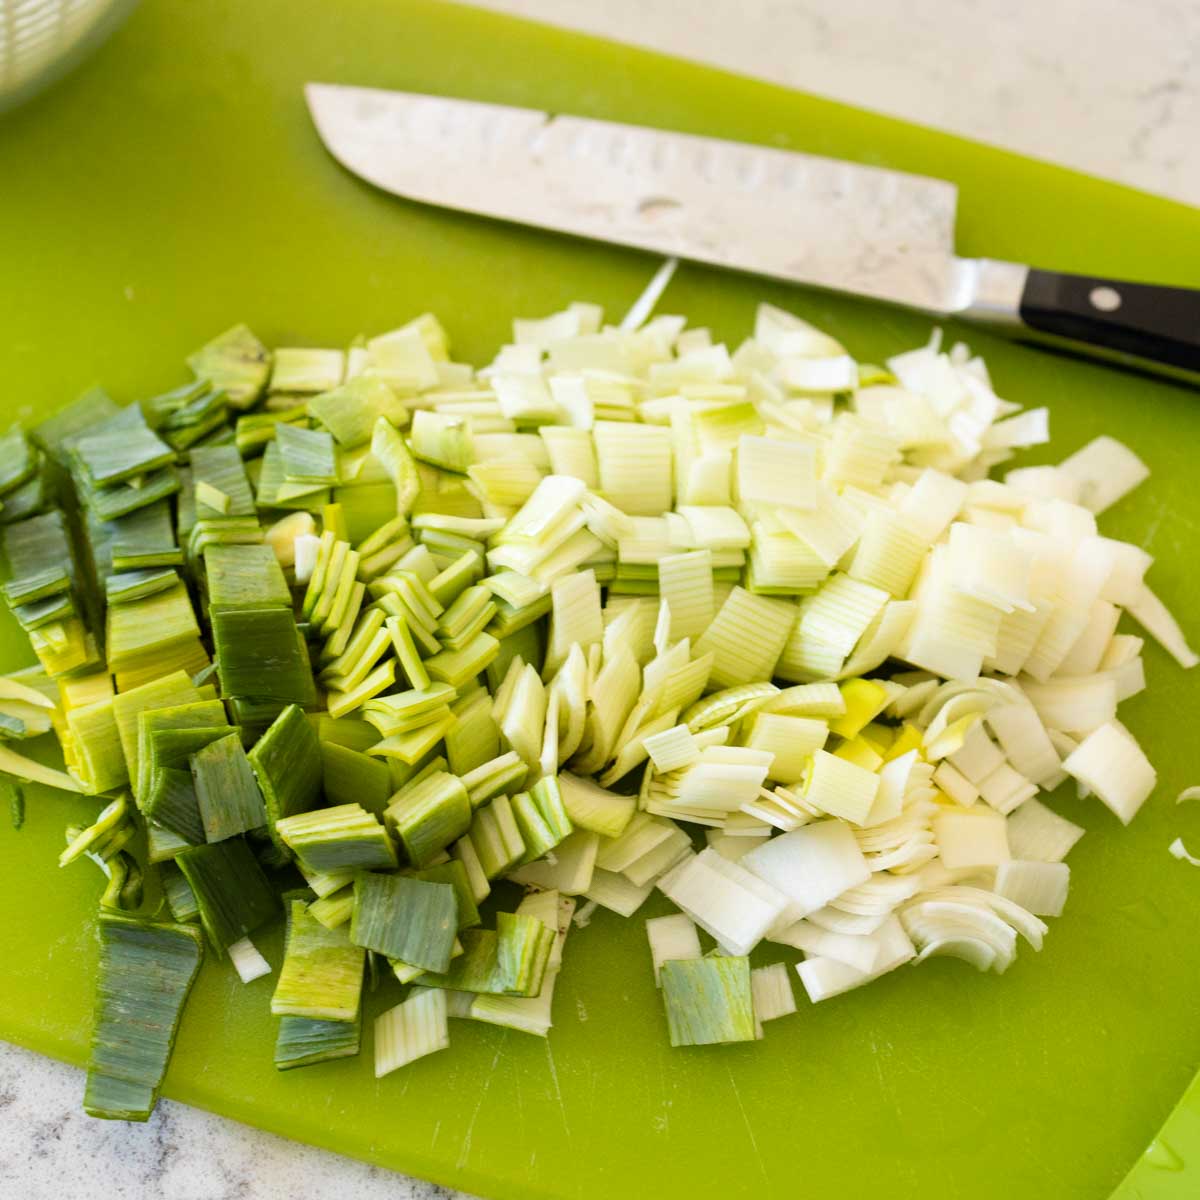 A diced leek is on a green cutting board next to a large chef knife.